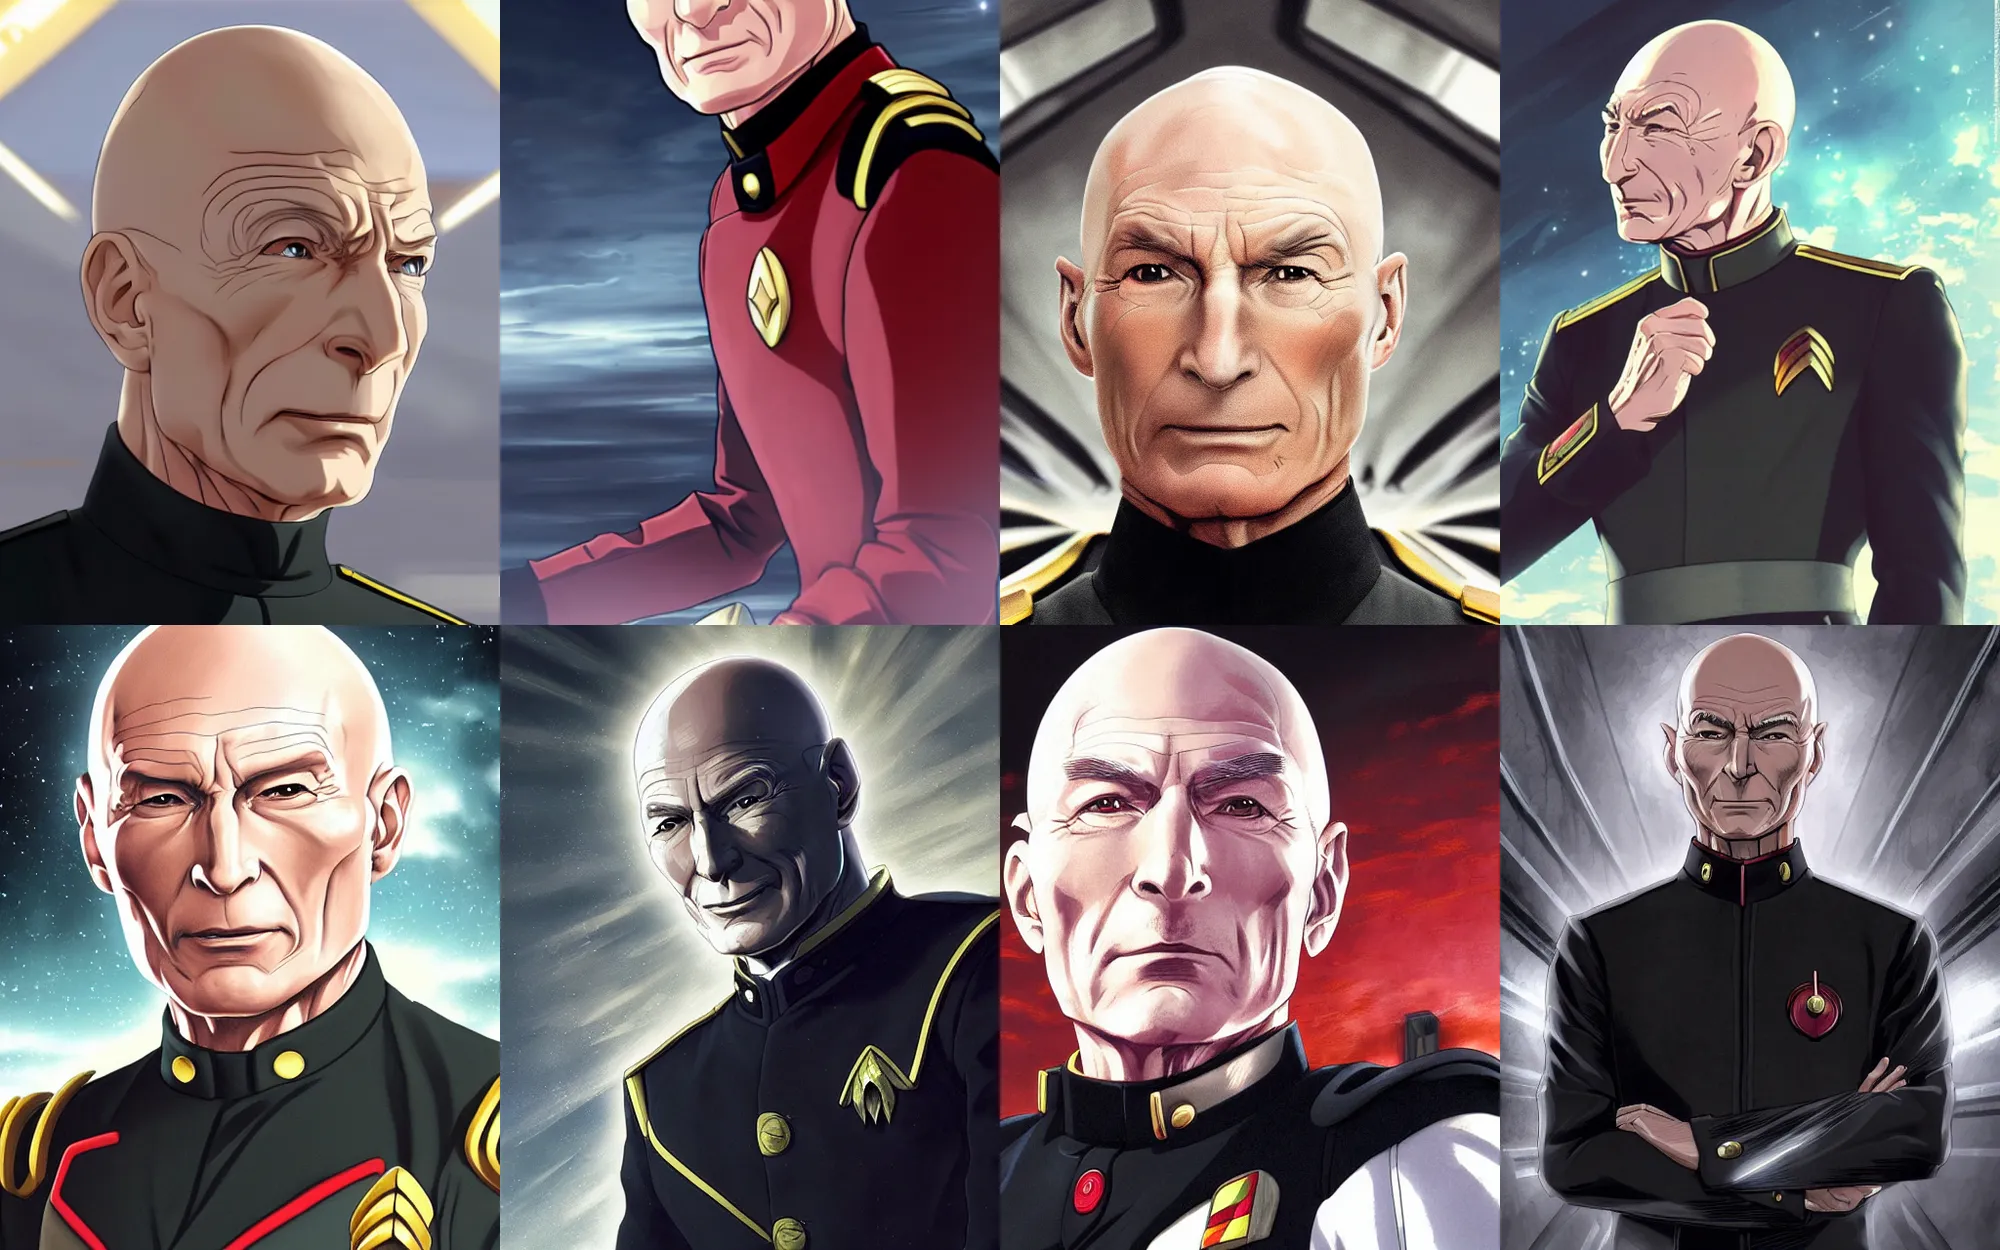 Prompt: Digital anime art by WLOP and Mobius, Closeup of Captain Picard wearing a [black uniform] from The Next Generation, silver insignia, serious expression, [[empty warehouse]] background, highly detailed, spotlight